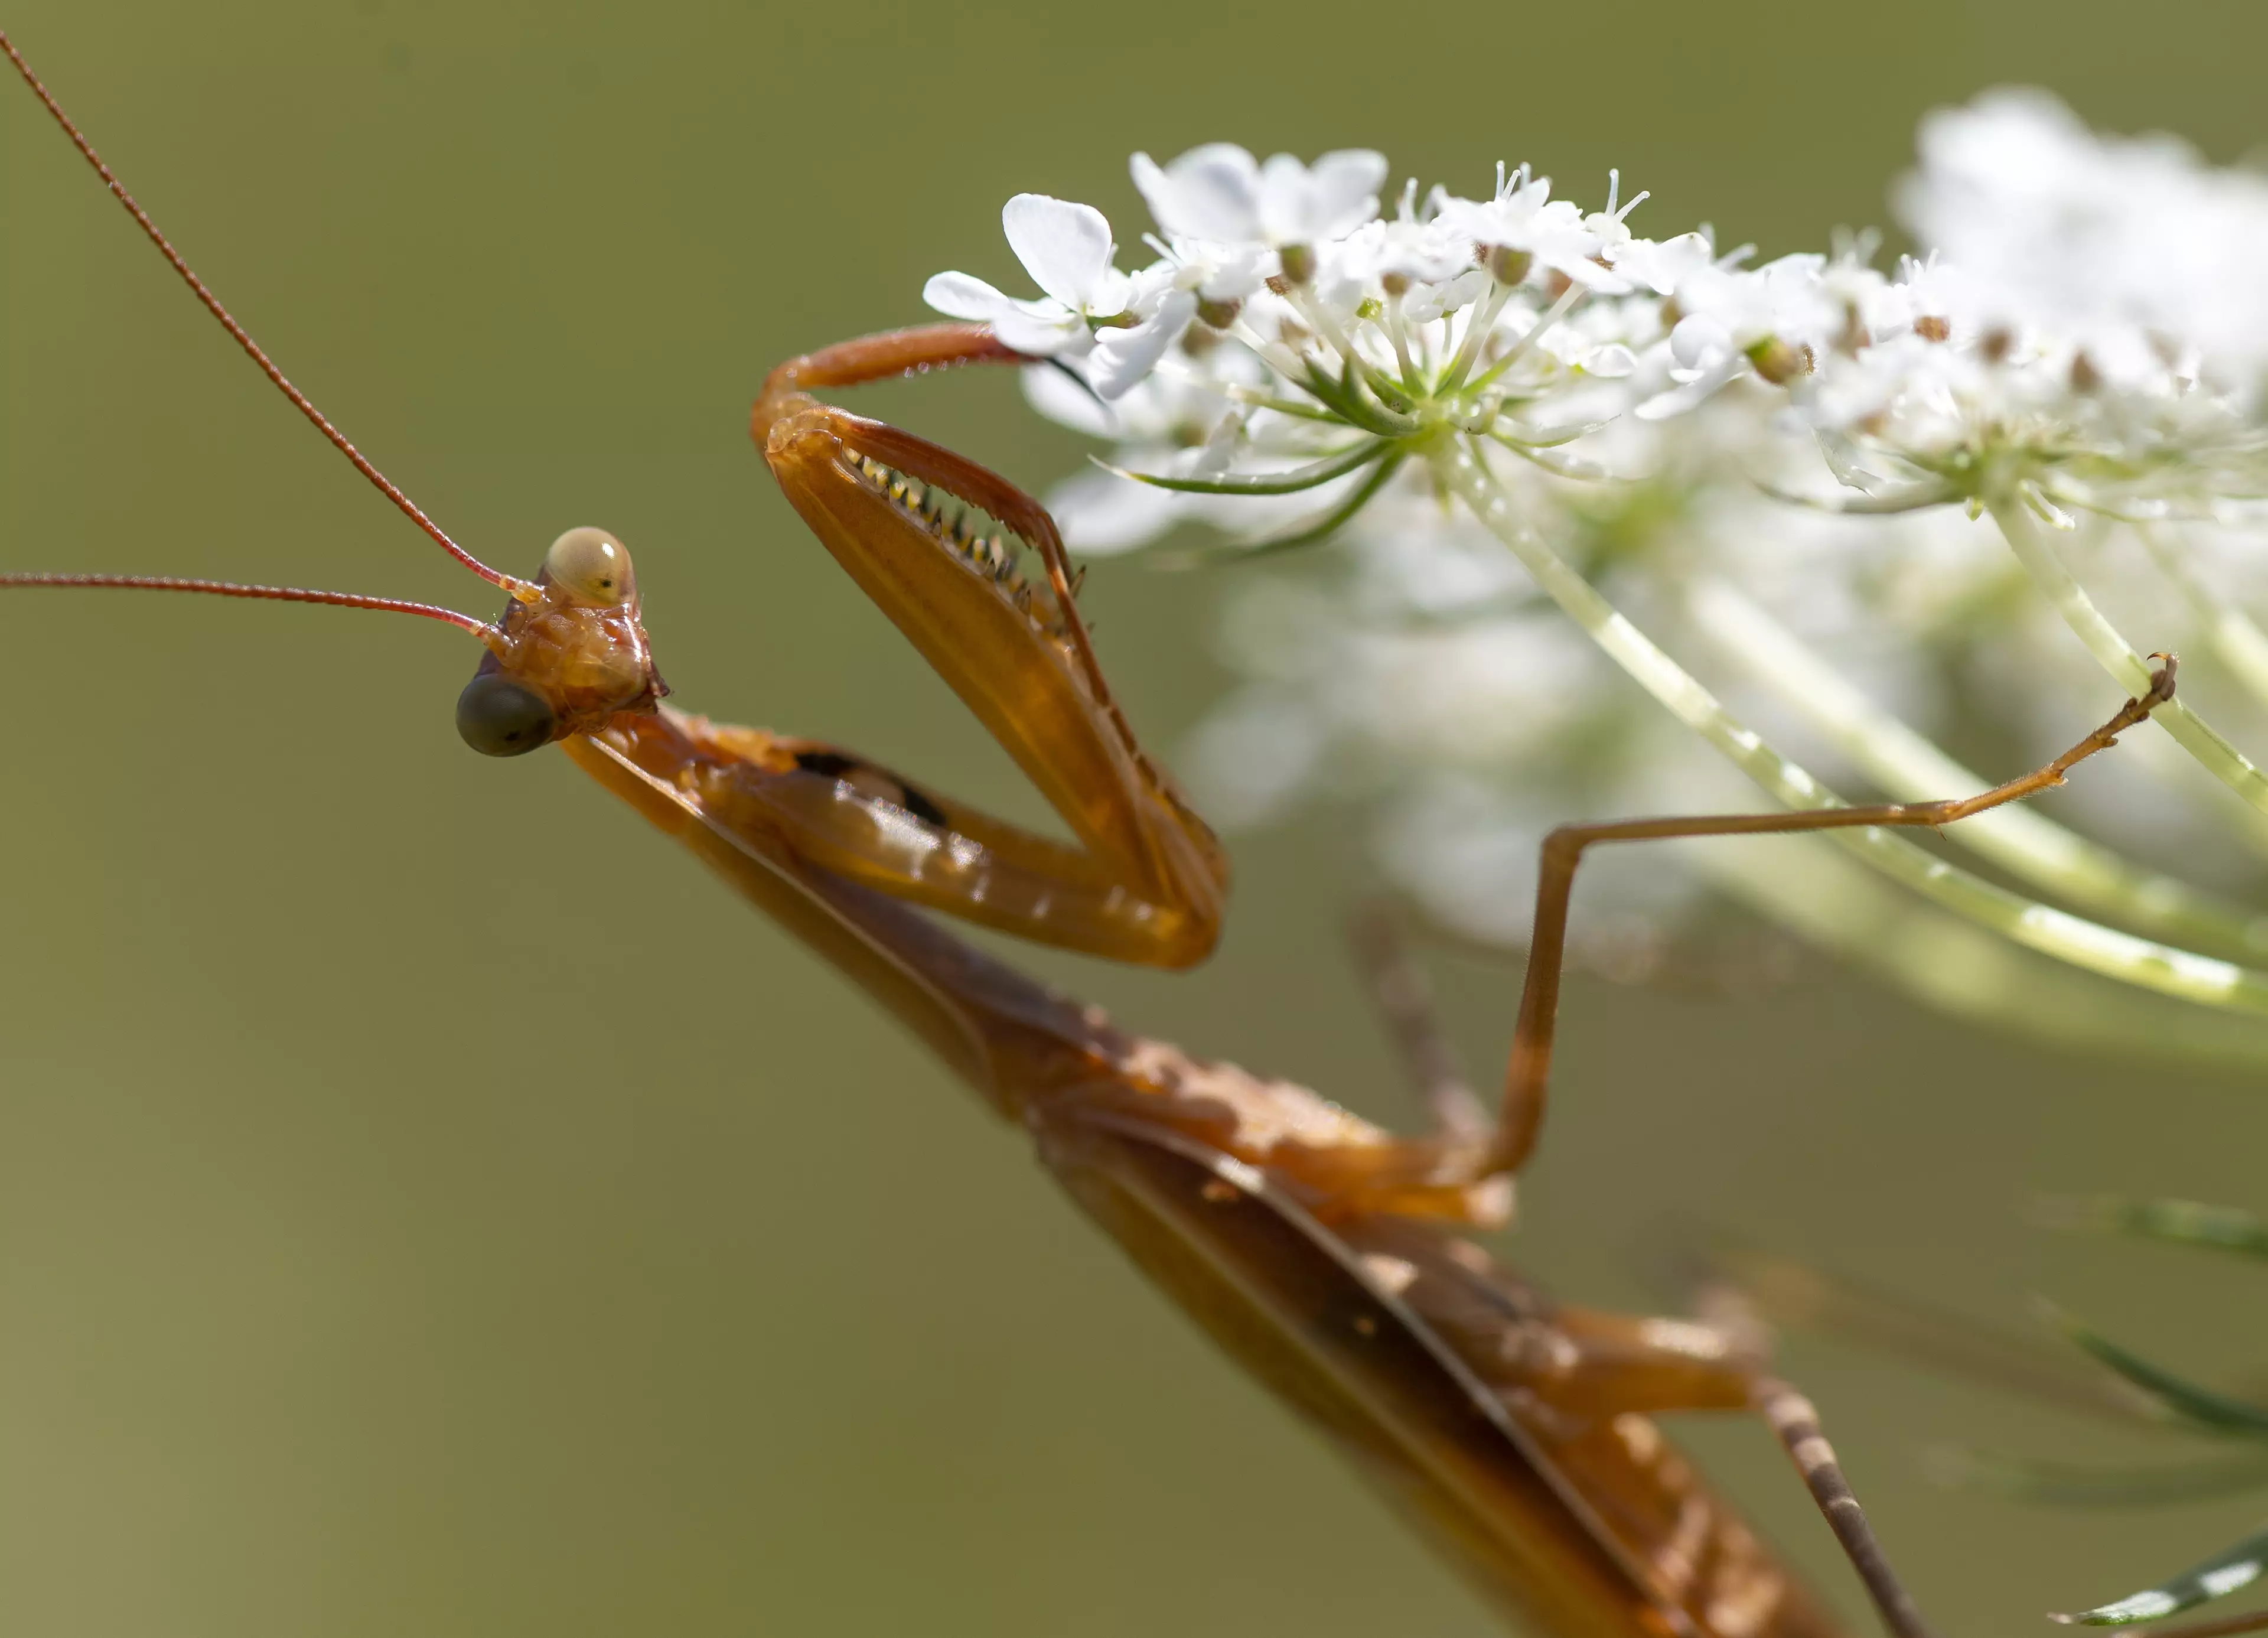 Fancy hundreds of praying mantis hatching in your home? (